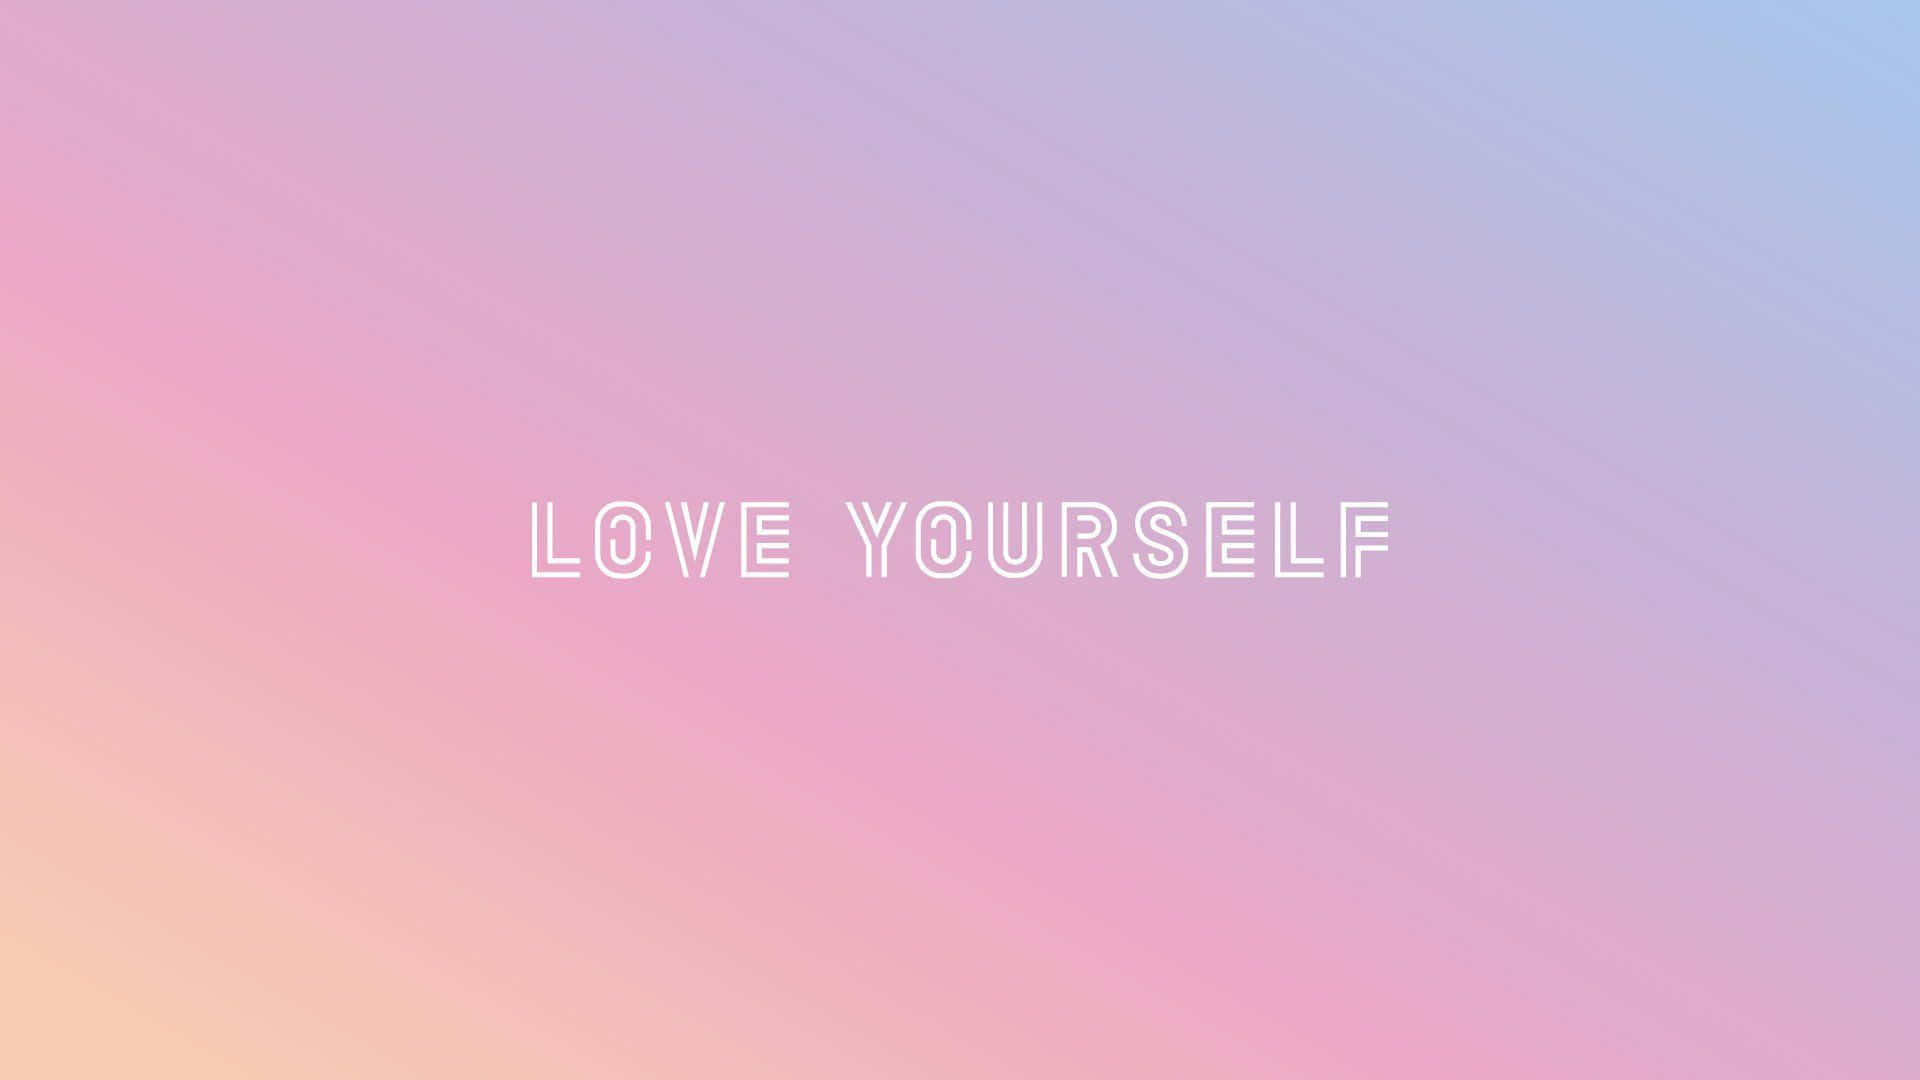 BTS Love Yourself - The Power of Self-Love and Positivity Wallpaper